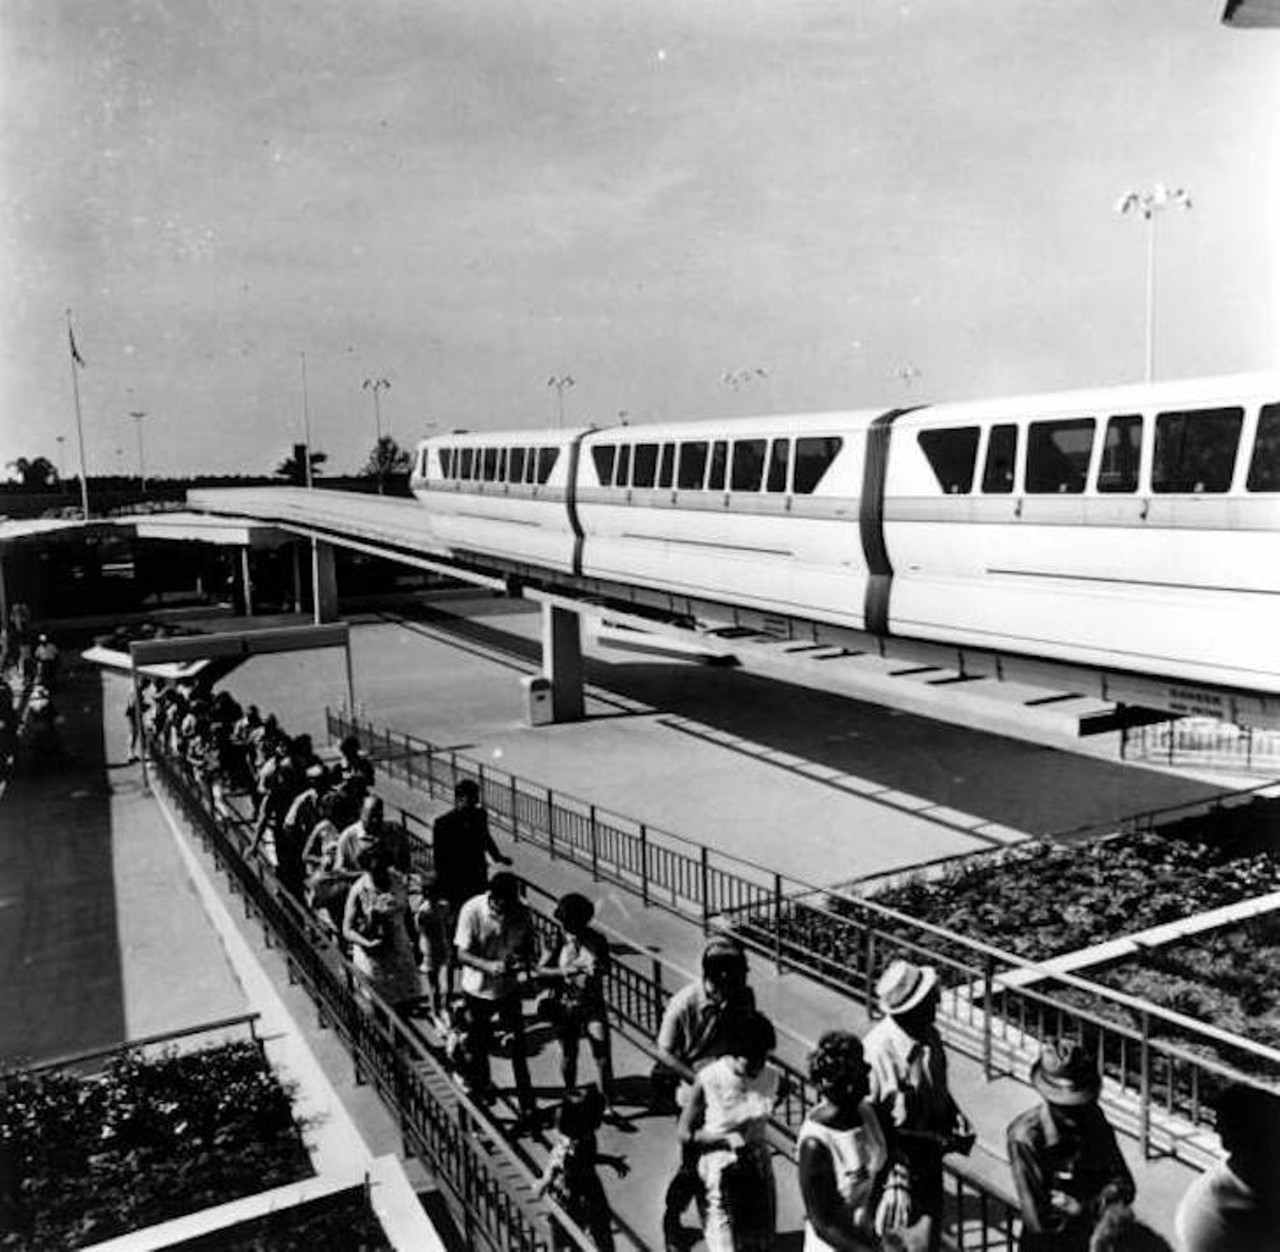 View of the monorail at the Magic Kingdom (1971).